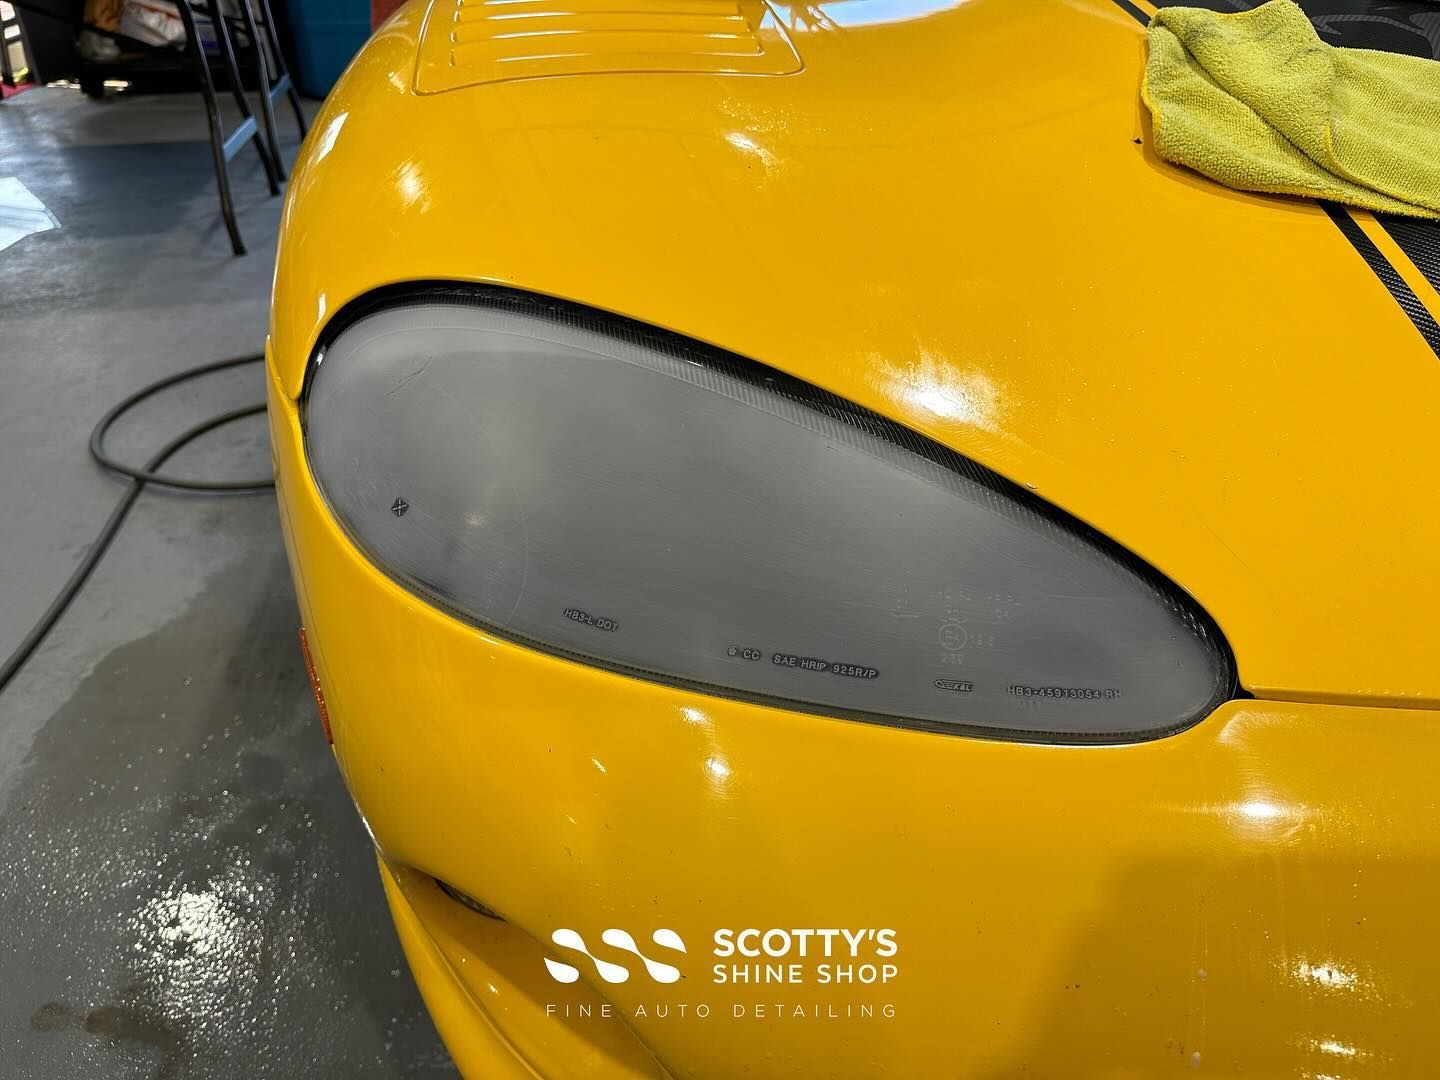 Dodge Viper Xpel Ultimate Plus Paint Protection Film on the Headlight Lenses in progress London, Ontario Canada